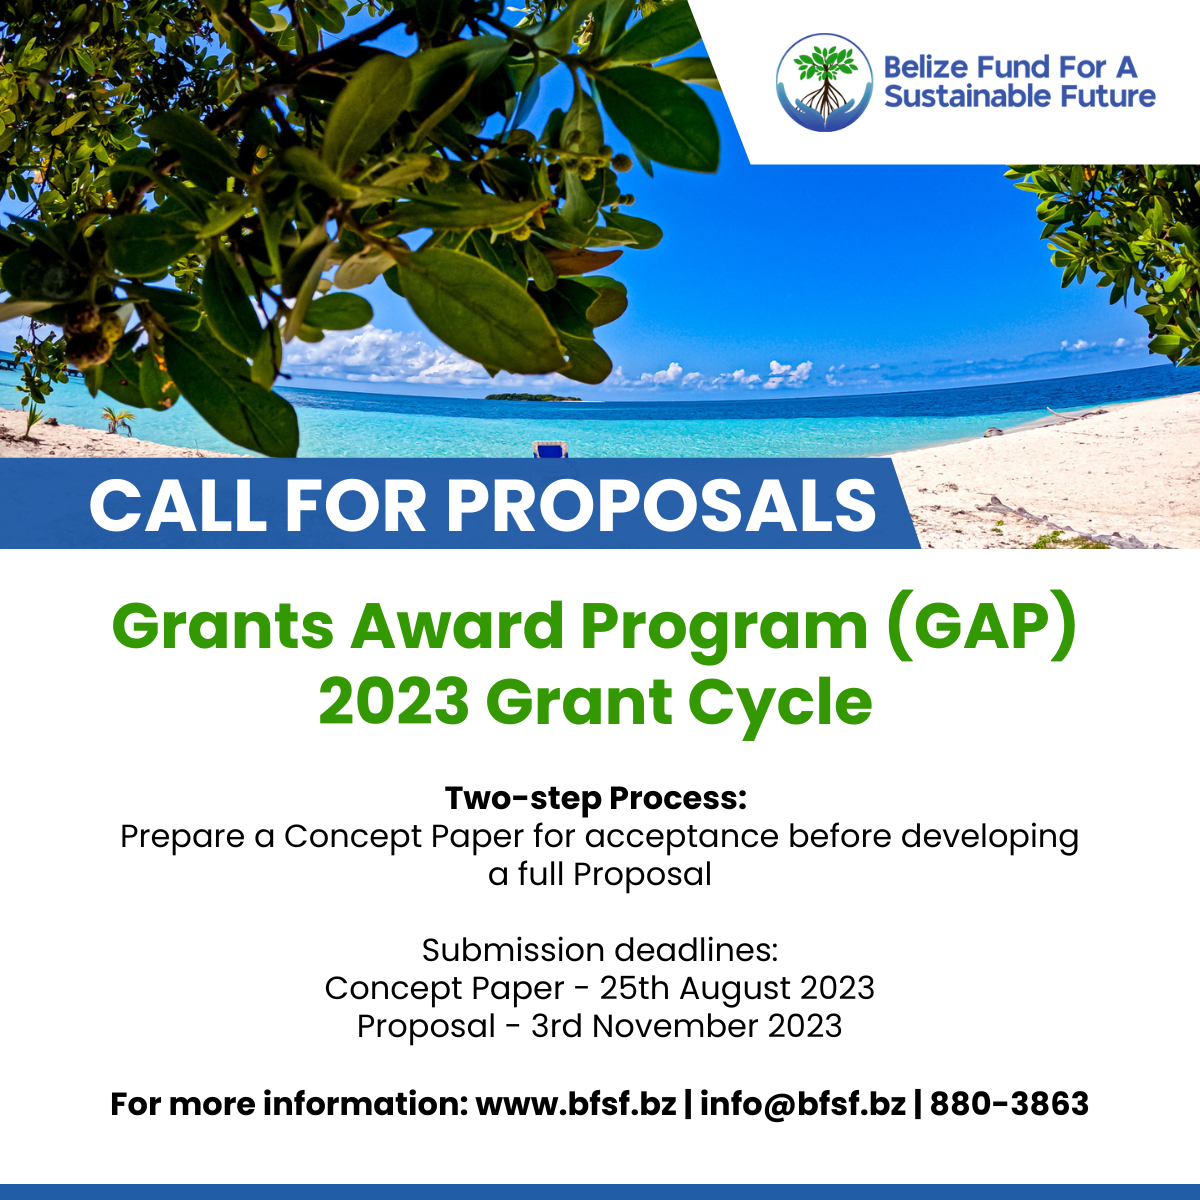 Belize Fund for a Sustainable Future Announces the opening of the Grants Award Program (Gap) 2023 grant cycle